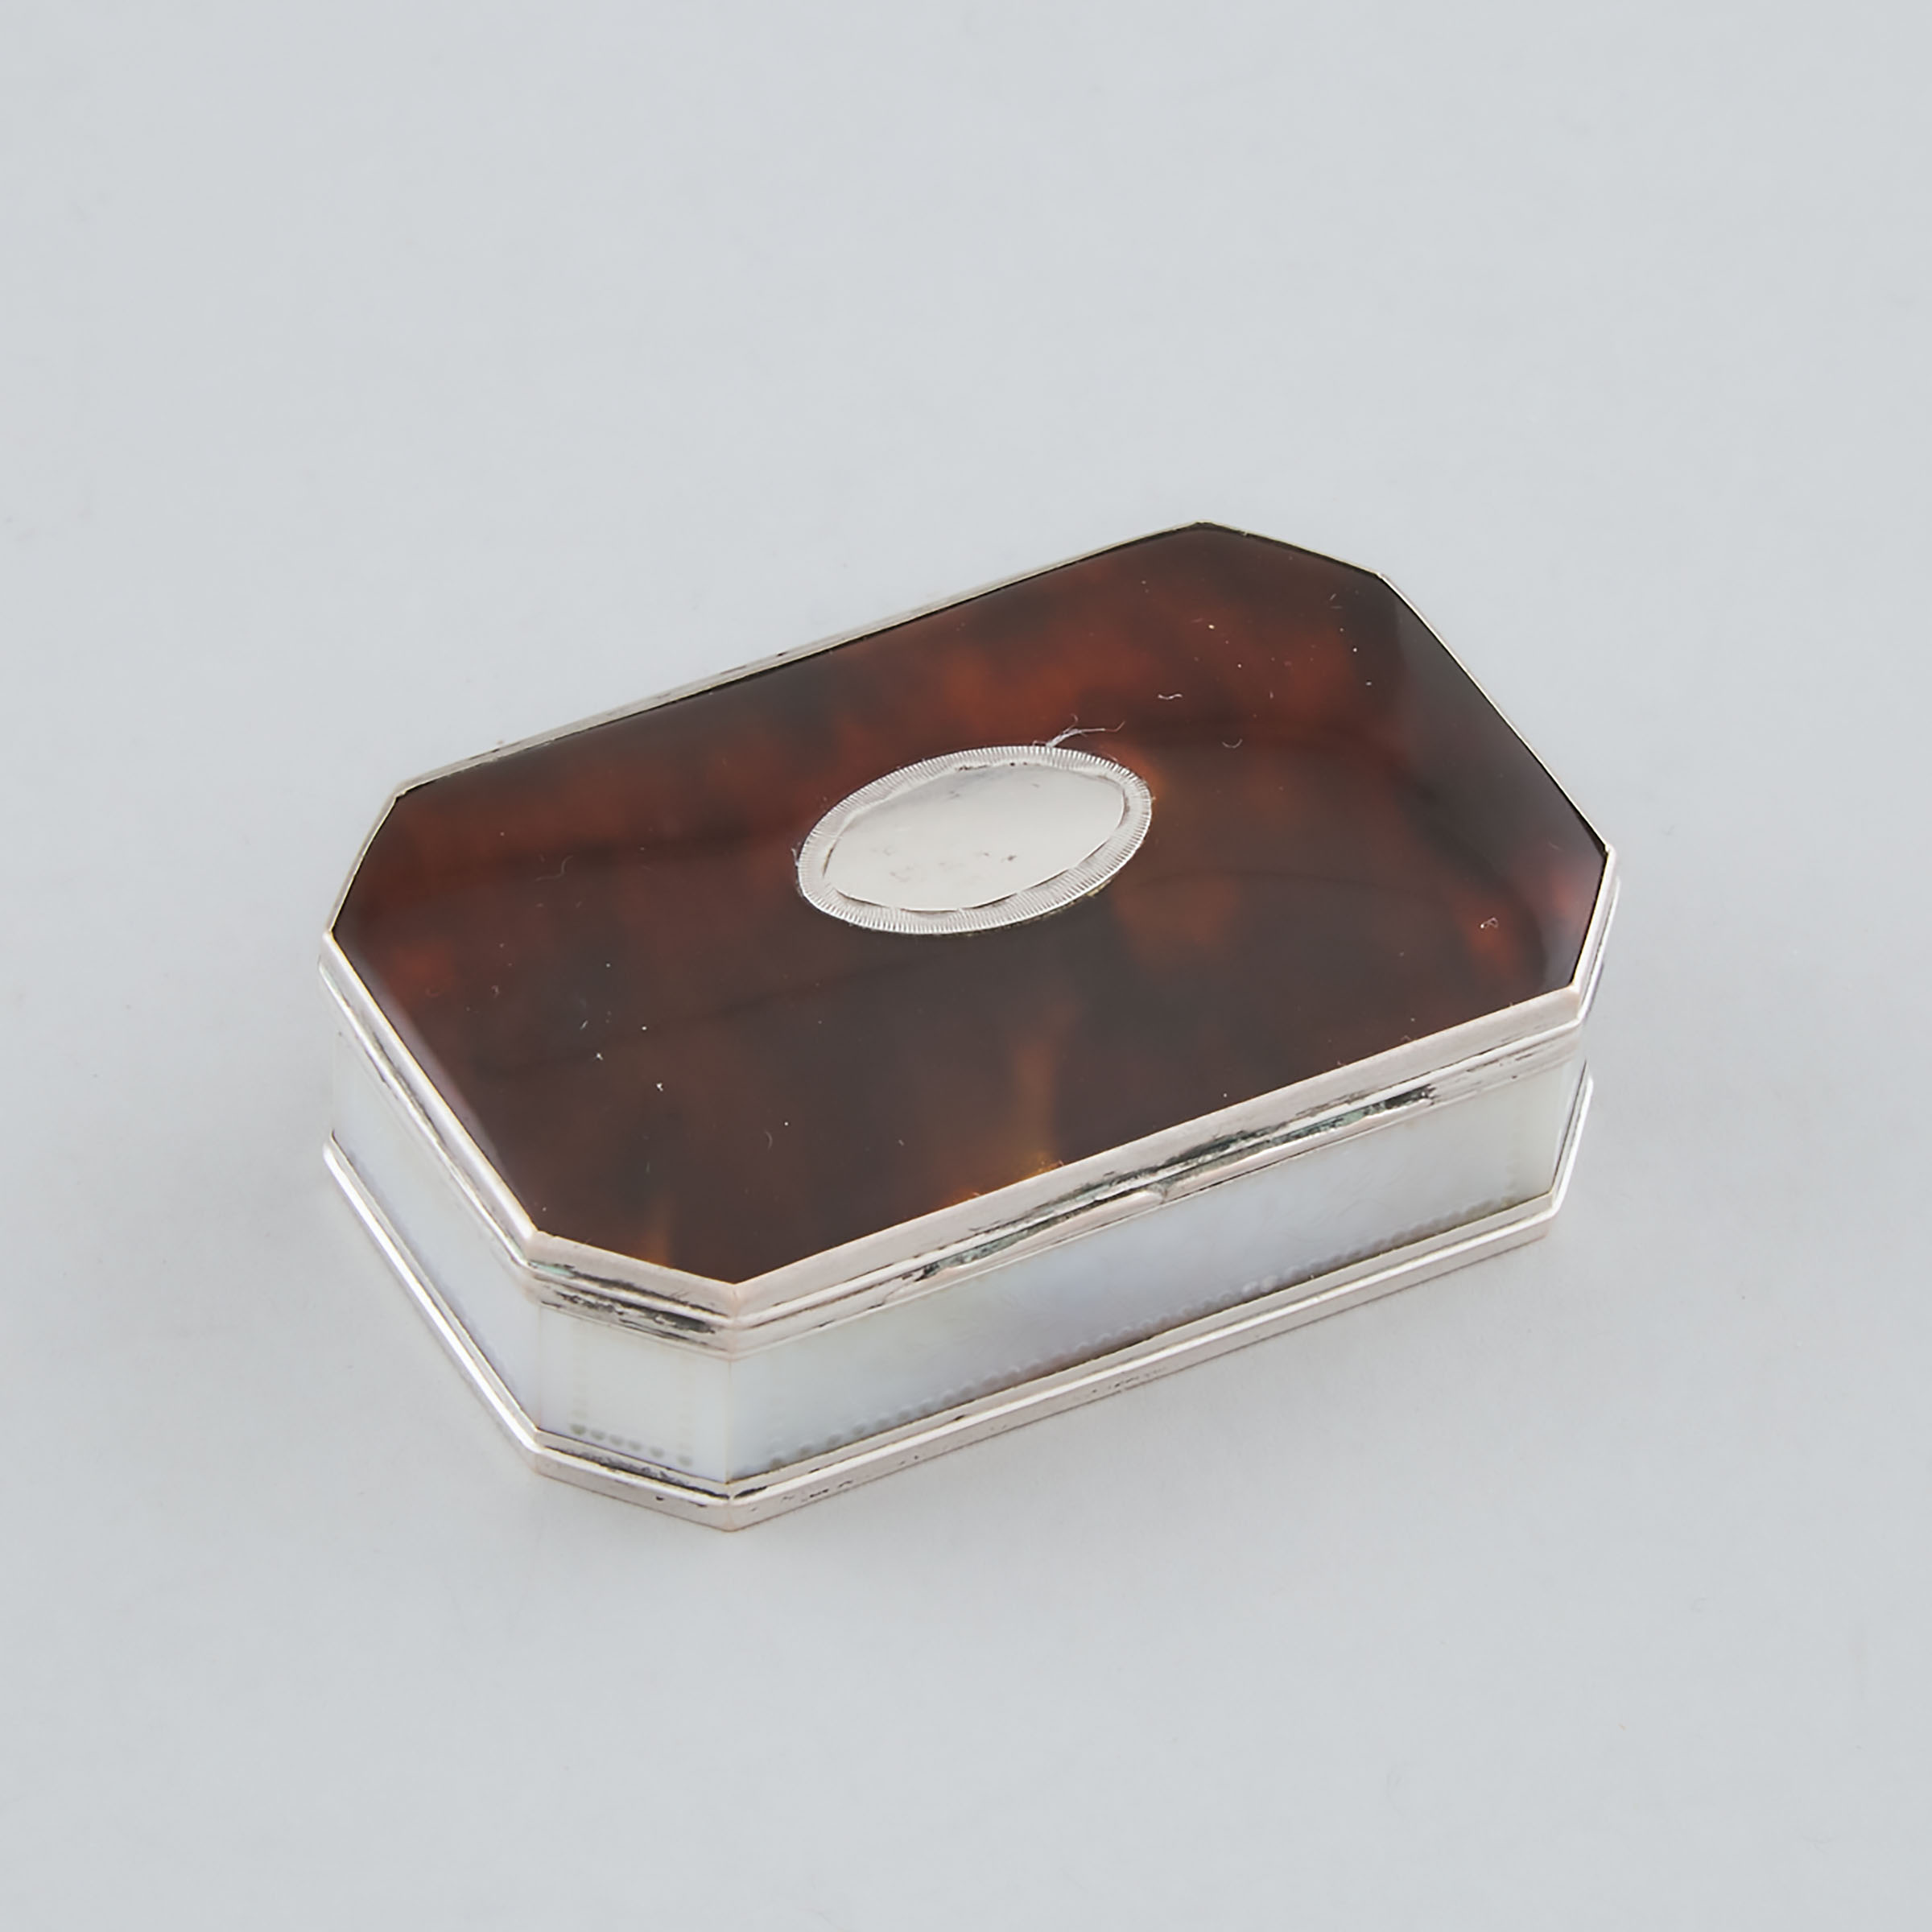 Continental Silver Mounted Tortoiseshell and Mother-of-Pearl Snuff Box, c.1800